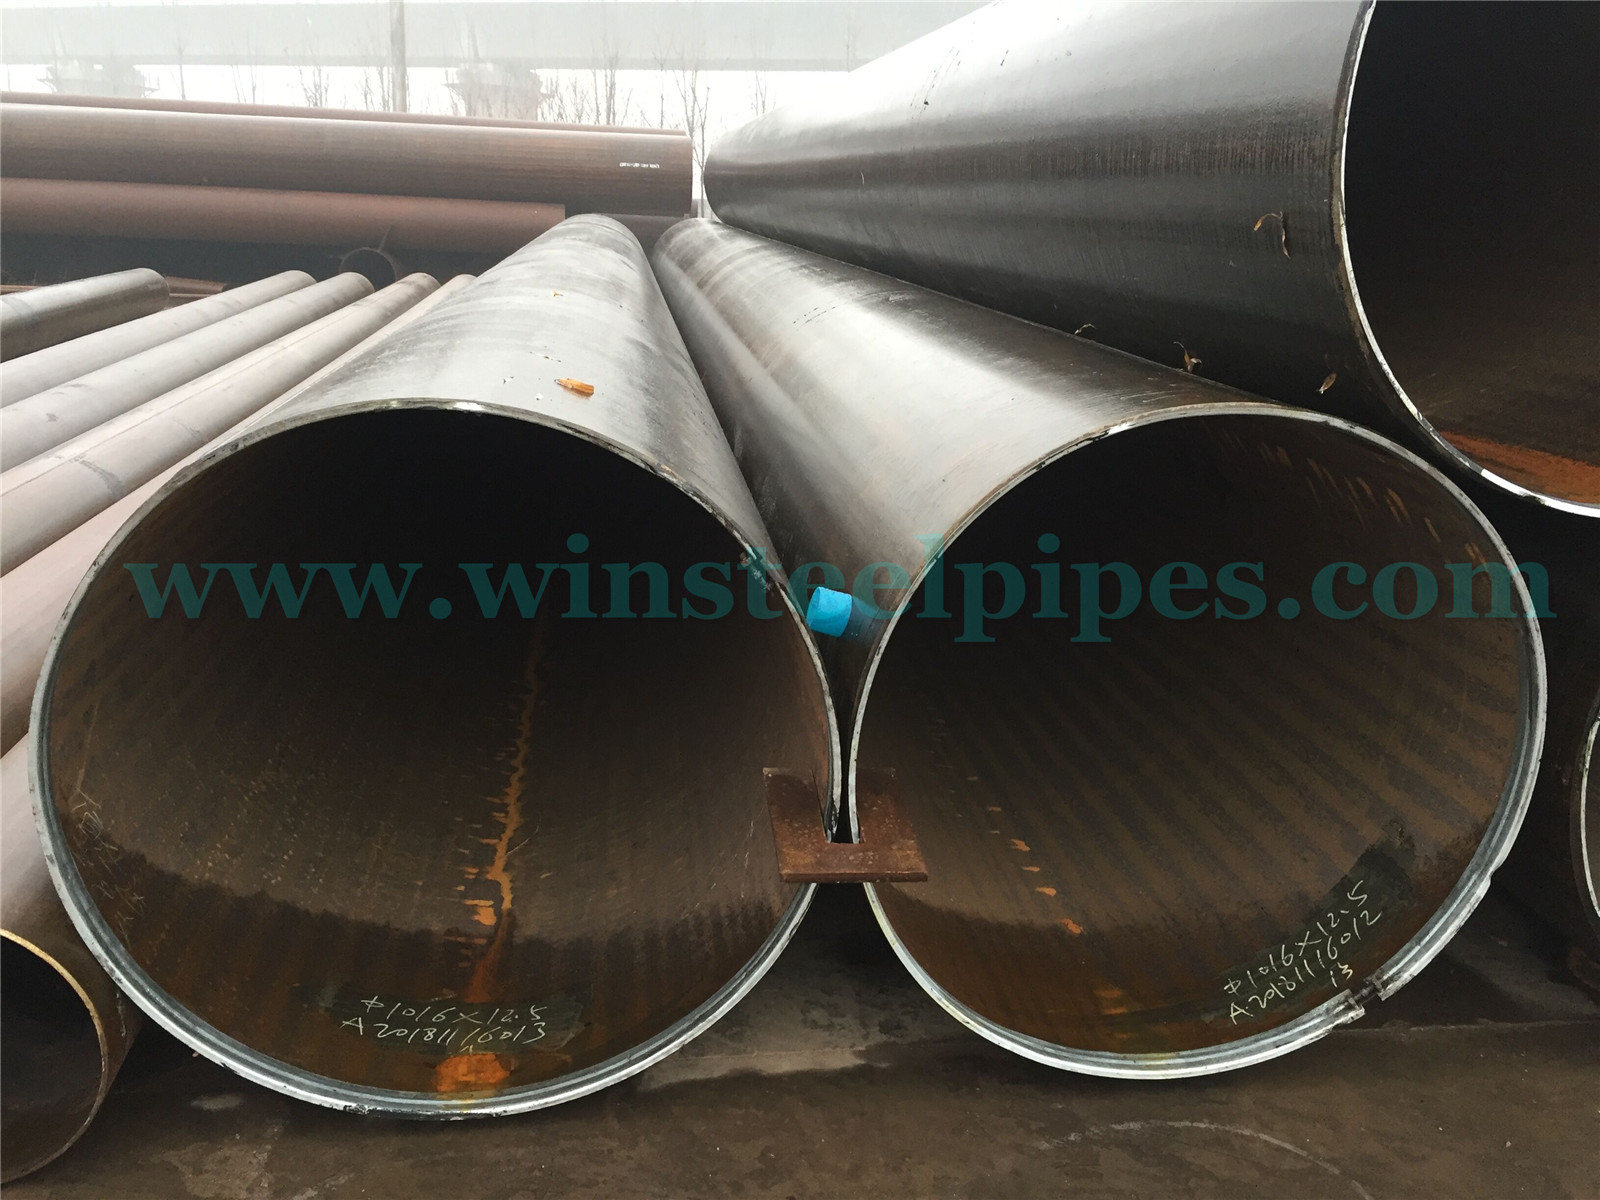 40 inch steel pipe - 1016